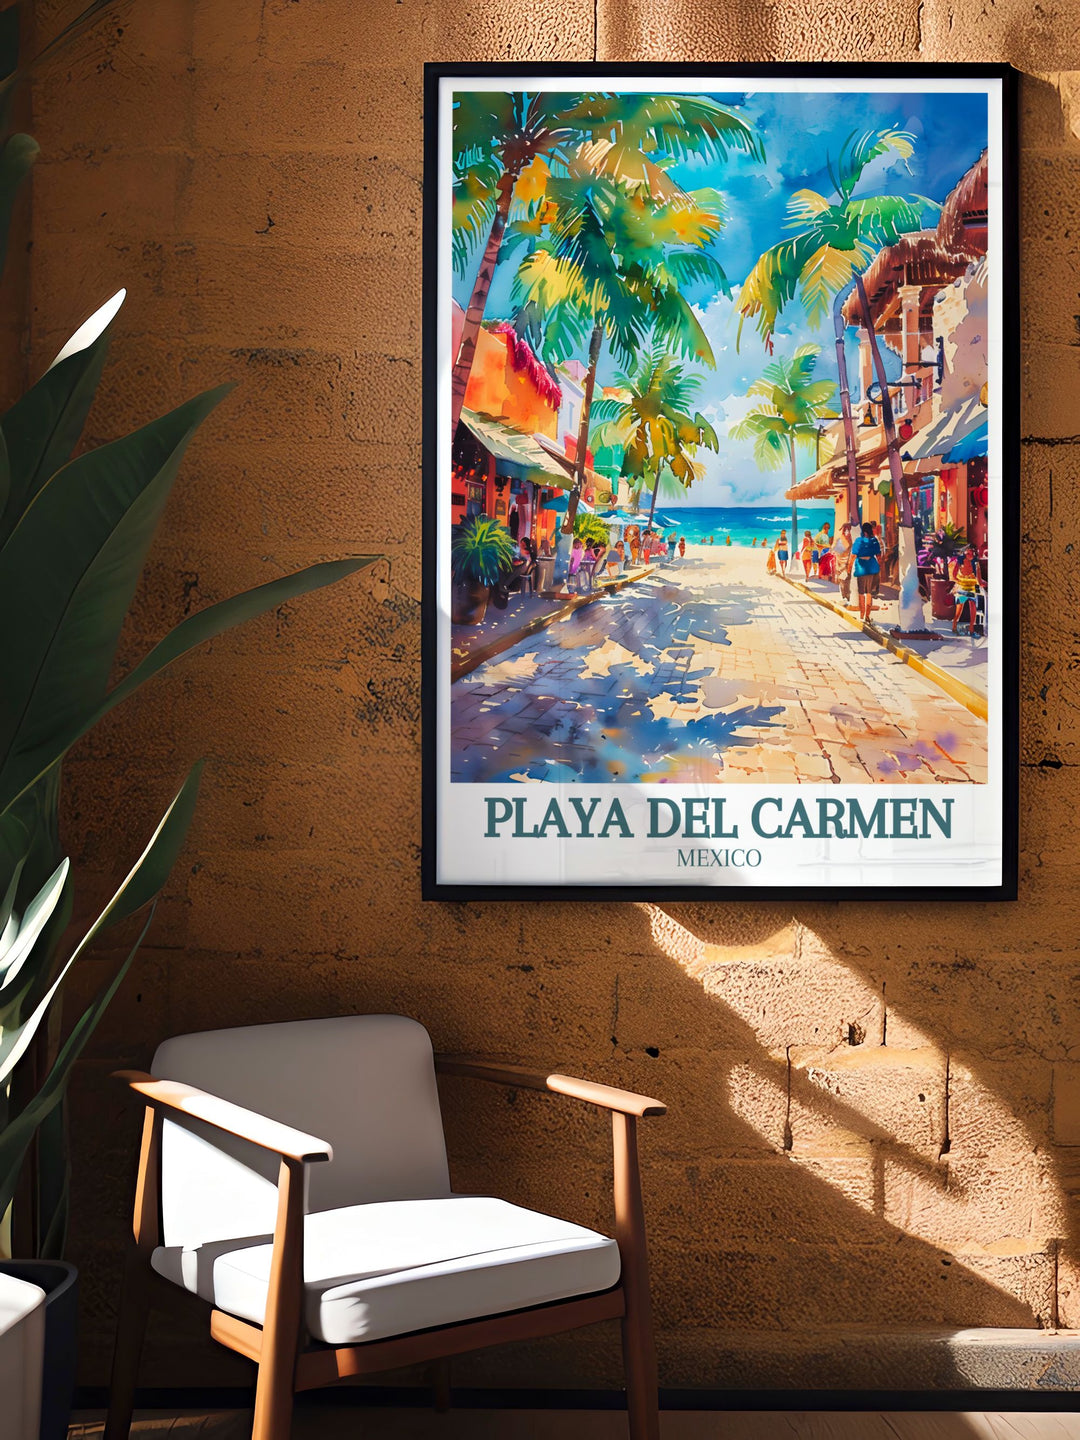 Playa Carmen artwork showcasing the vibrant La Quinta Avenida and the serene Caribbean Sea perfect for adding a touch of tropical beauty to your home decor ideal for those who love Mexican culture and coastal landscapes.